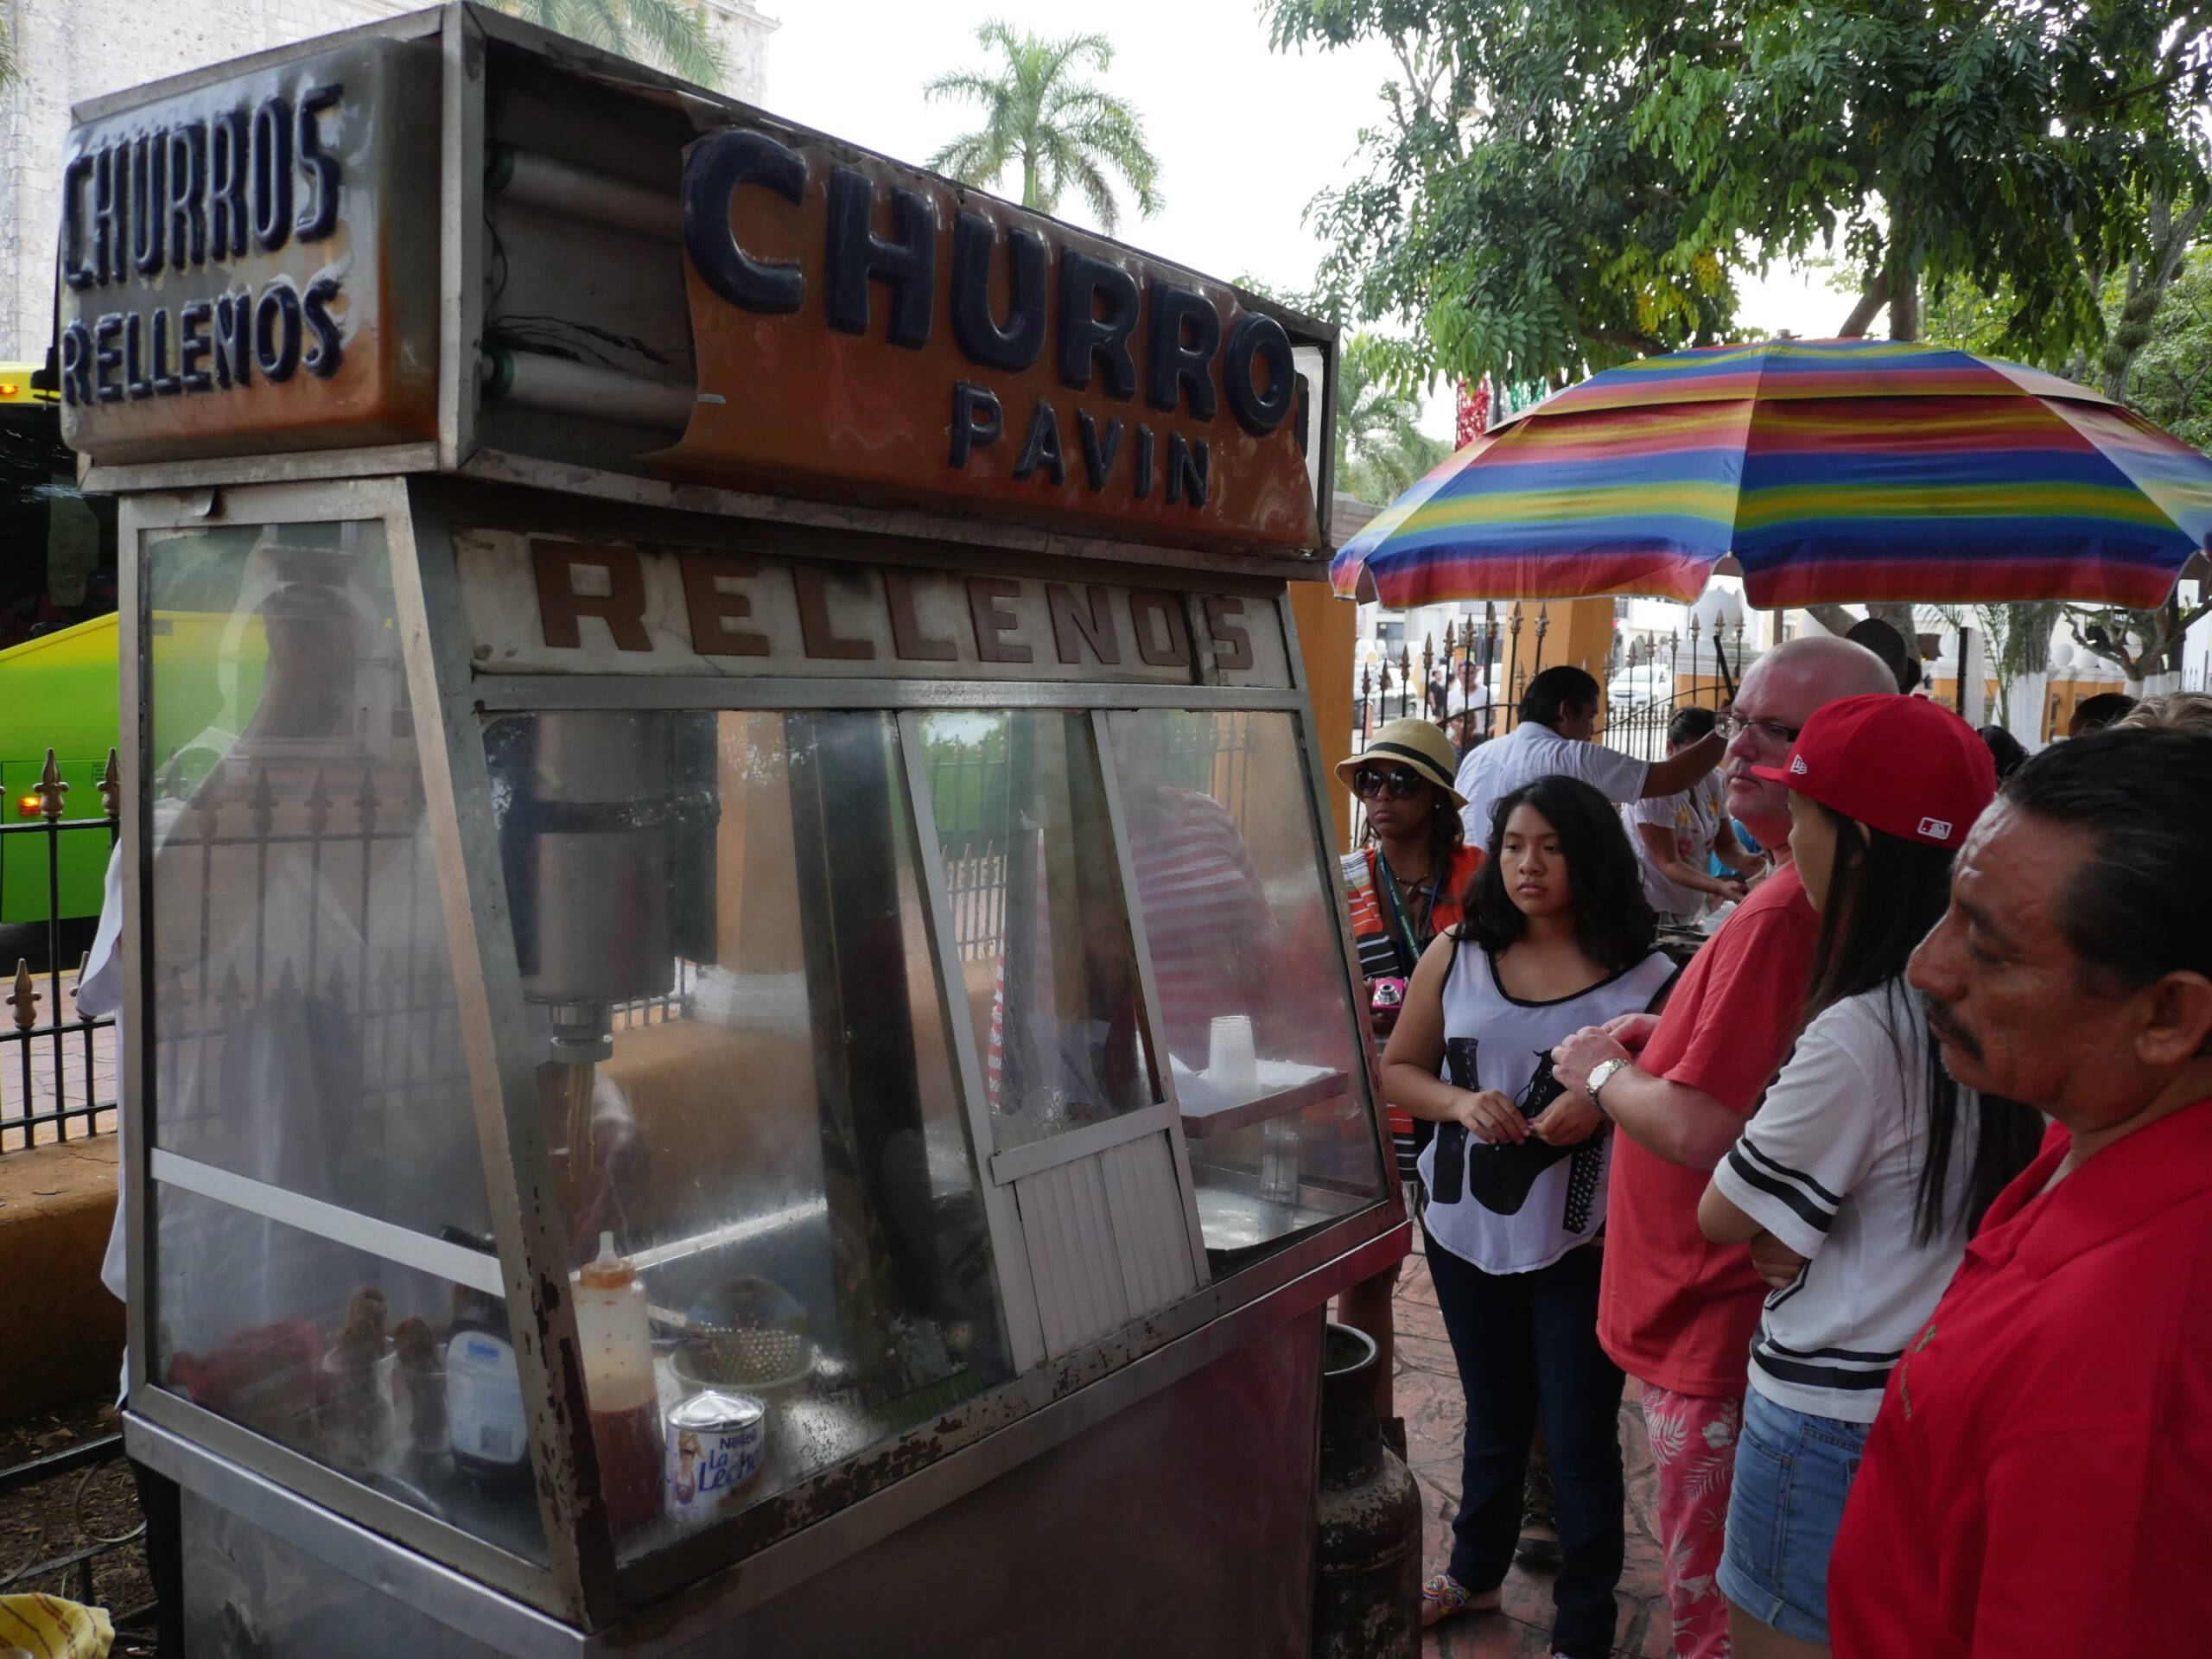 A vendor sells stuffed churros in Valladolid, Mexico.